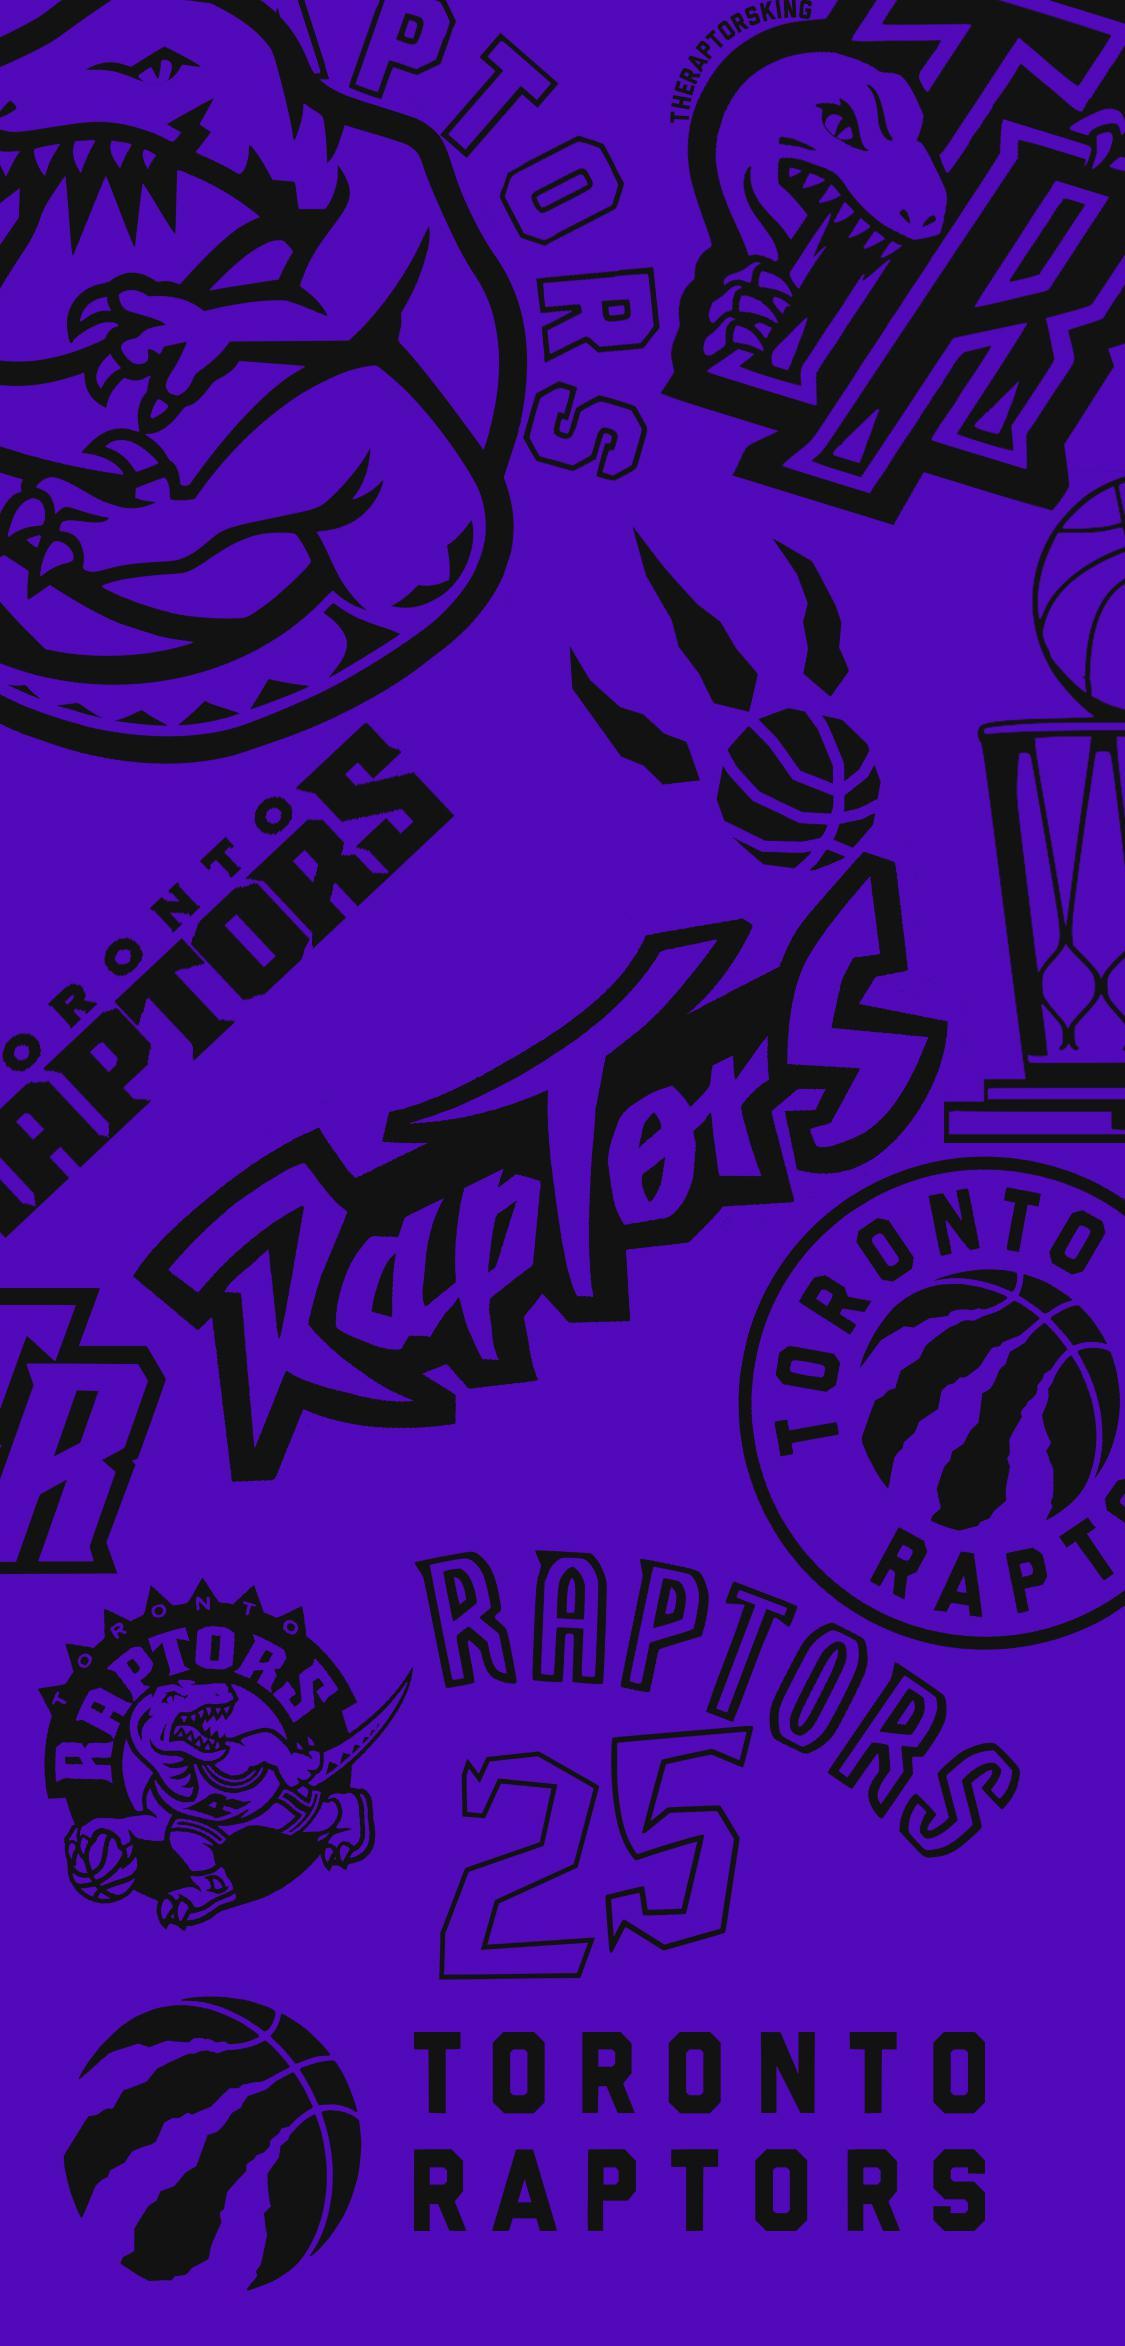 Raptors iPhone Wallpaper I made for their 25th anniversary